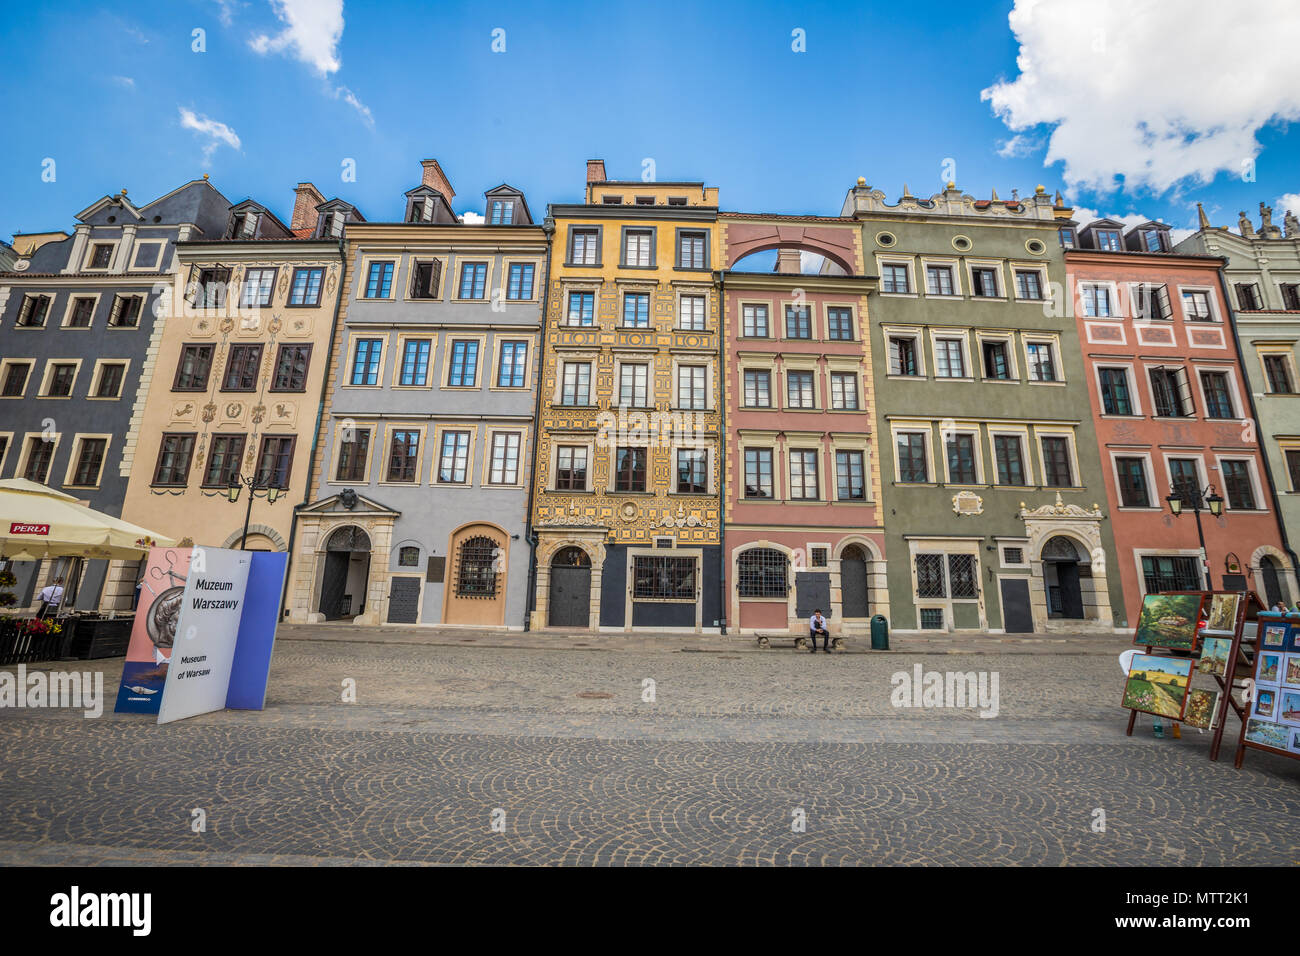 Buildings in Old town square of Warsaw Stock Photo